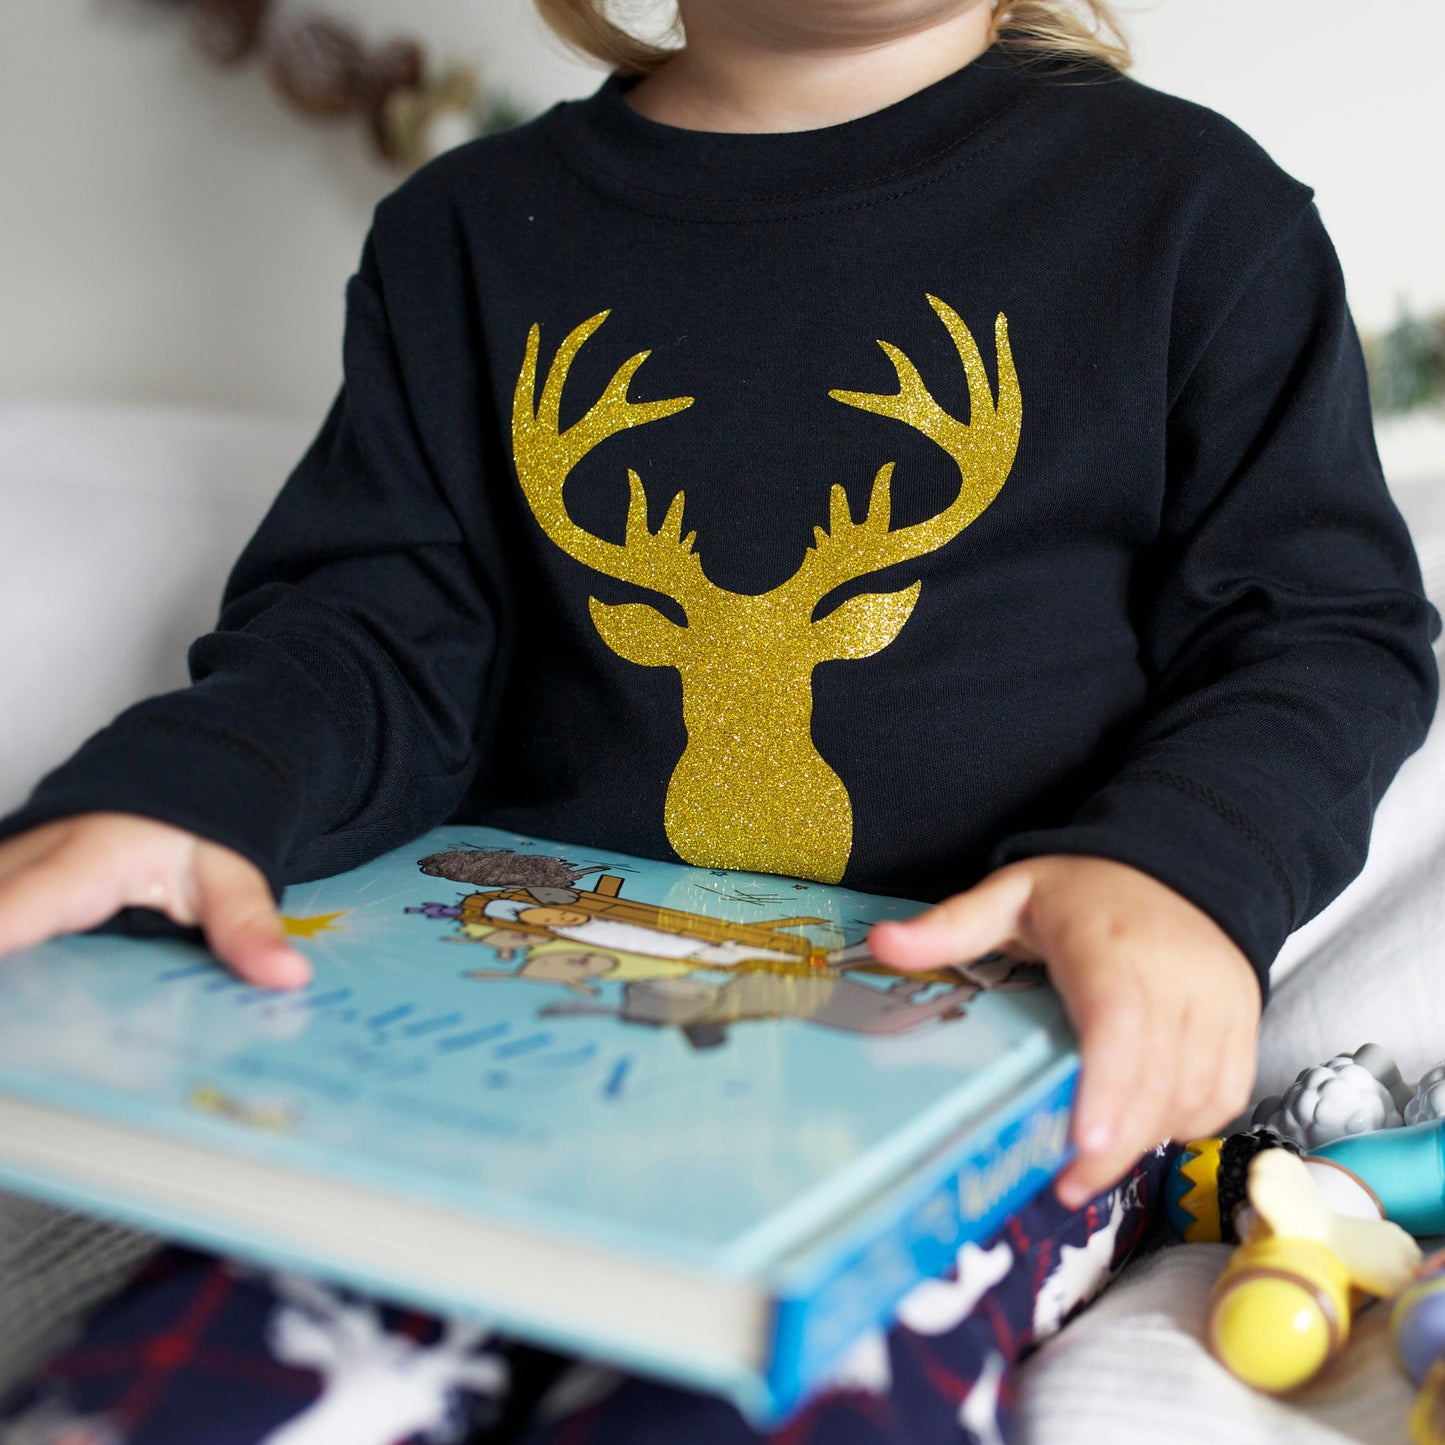 Black & Gold Stag Long Sleeve Top